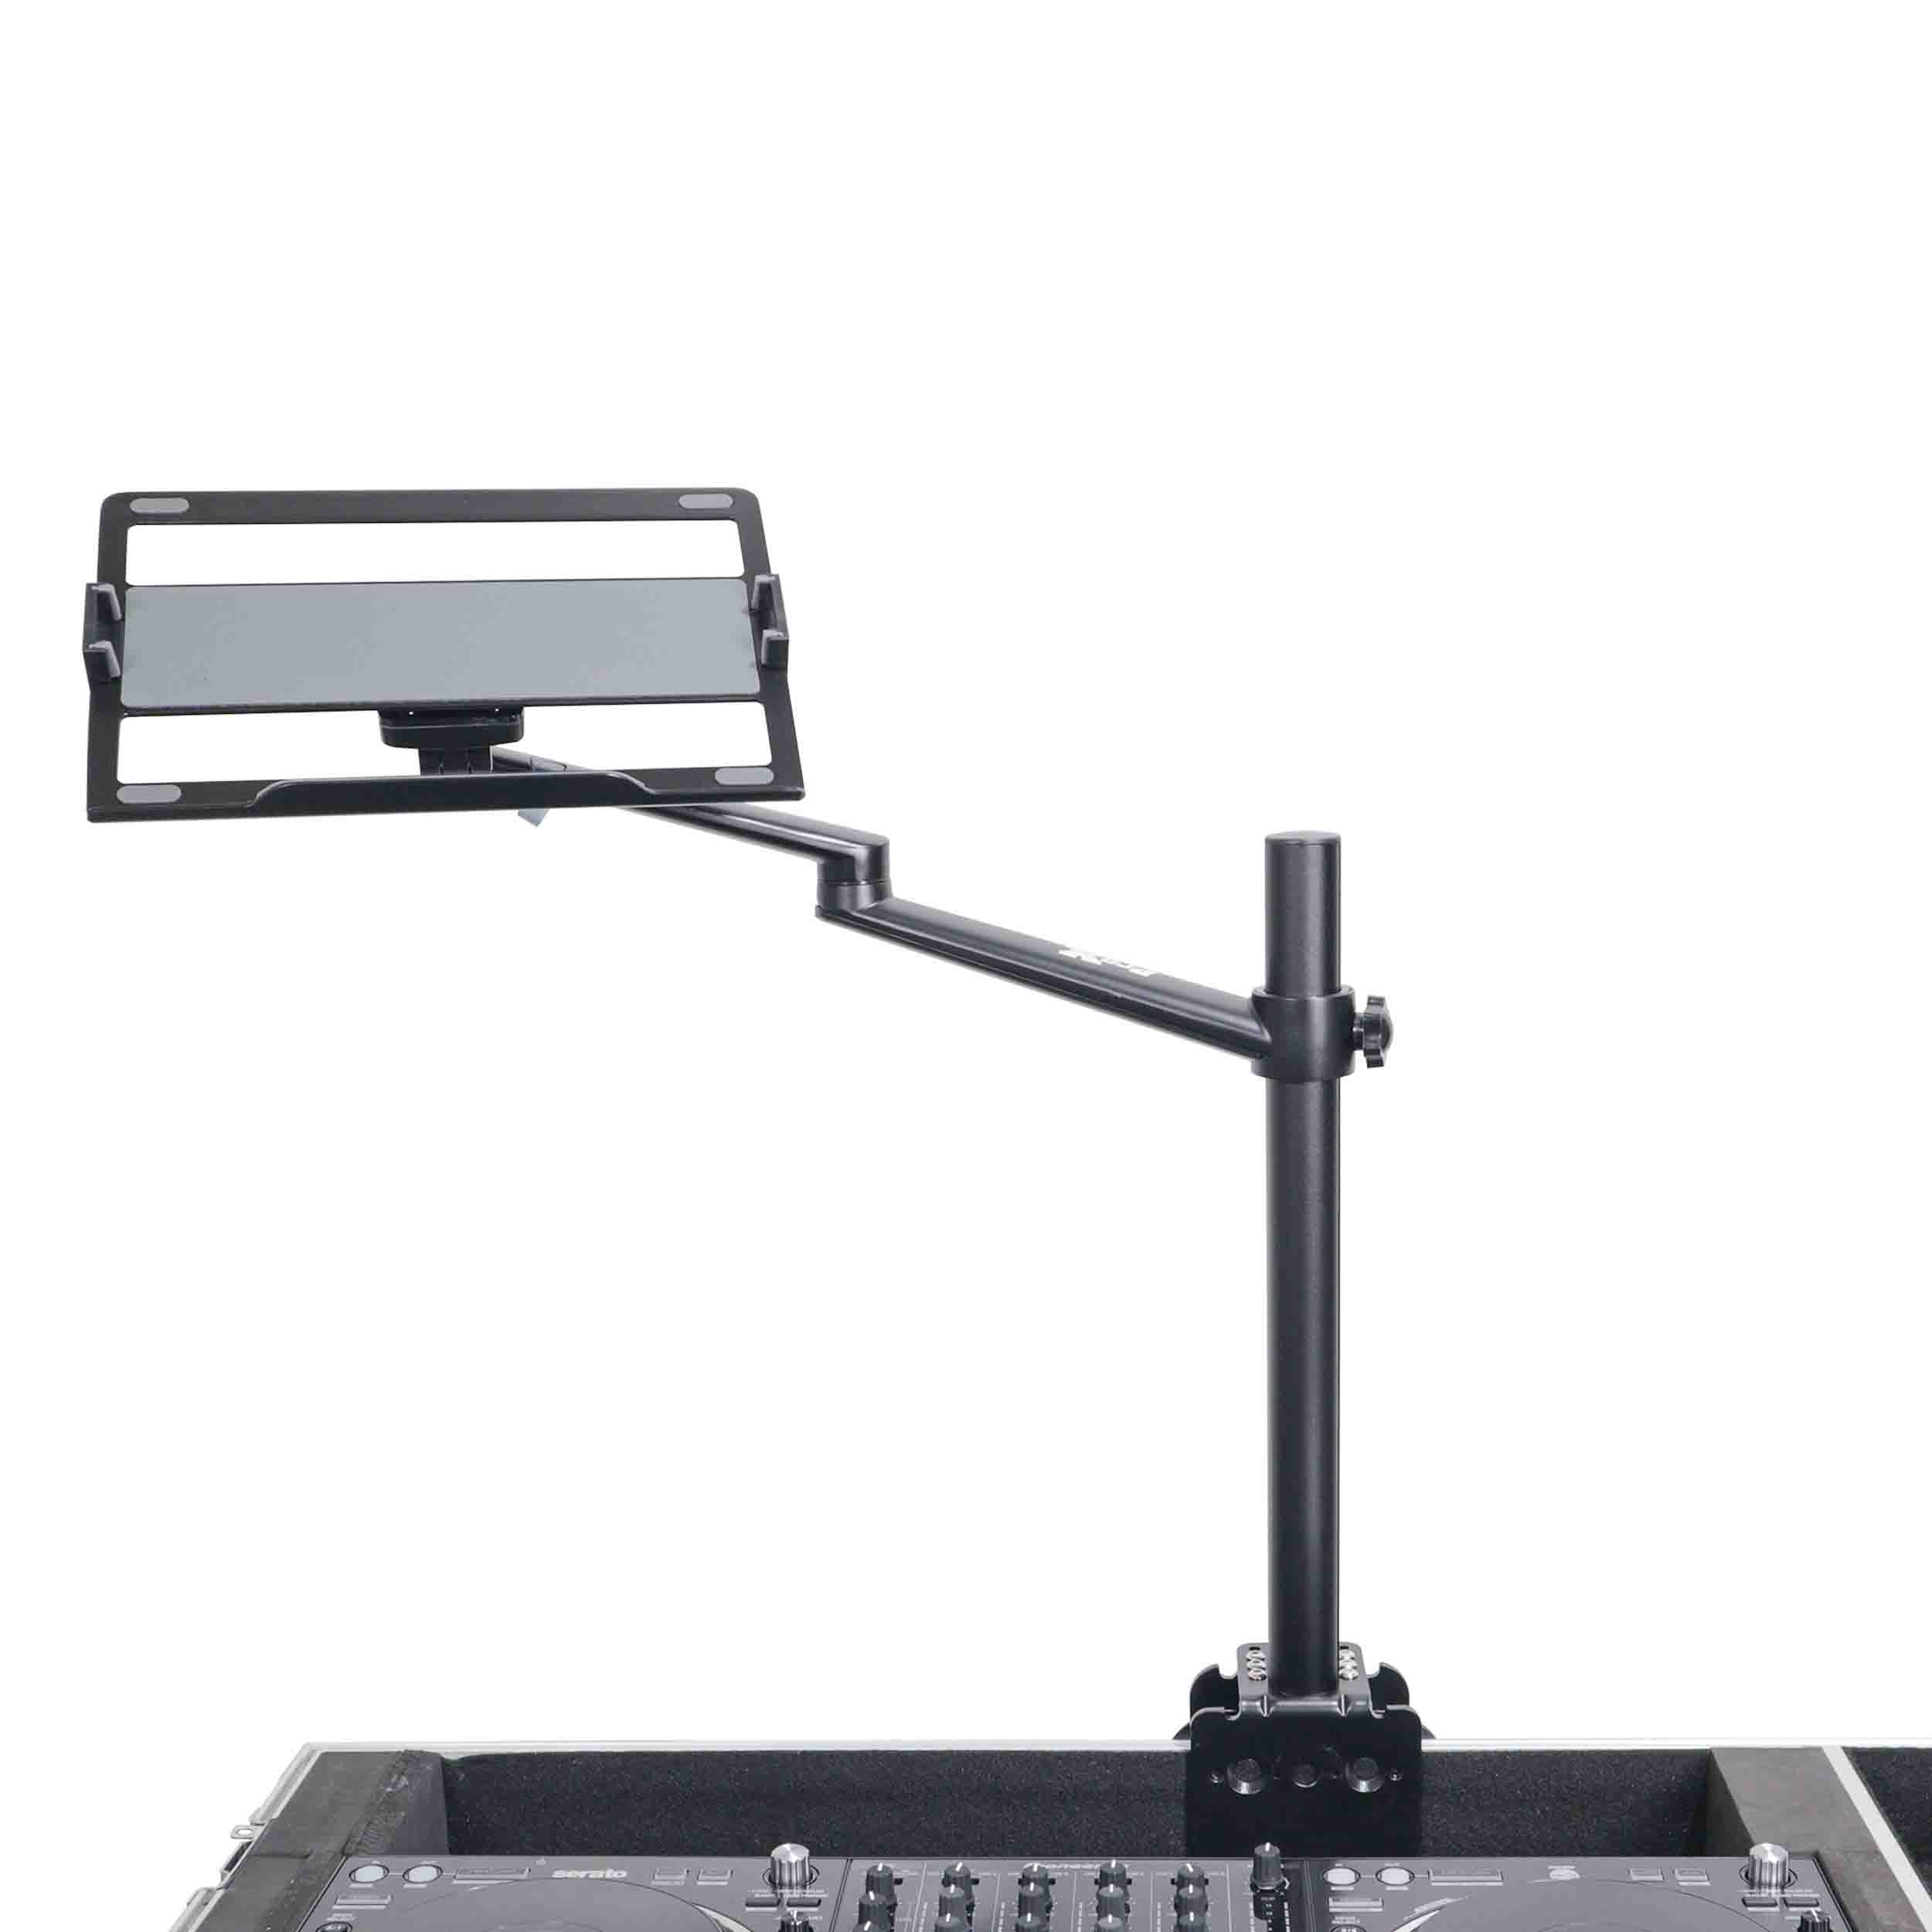 B-Stock: ProX X-FLEXARMBLK Adjustable Arm Mount Stand for 12-17" Laptop,VESA 75X75 and 100X100 fit 17-32" Monitor, Flight Case/Table - Black by ProX Cases